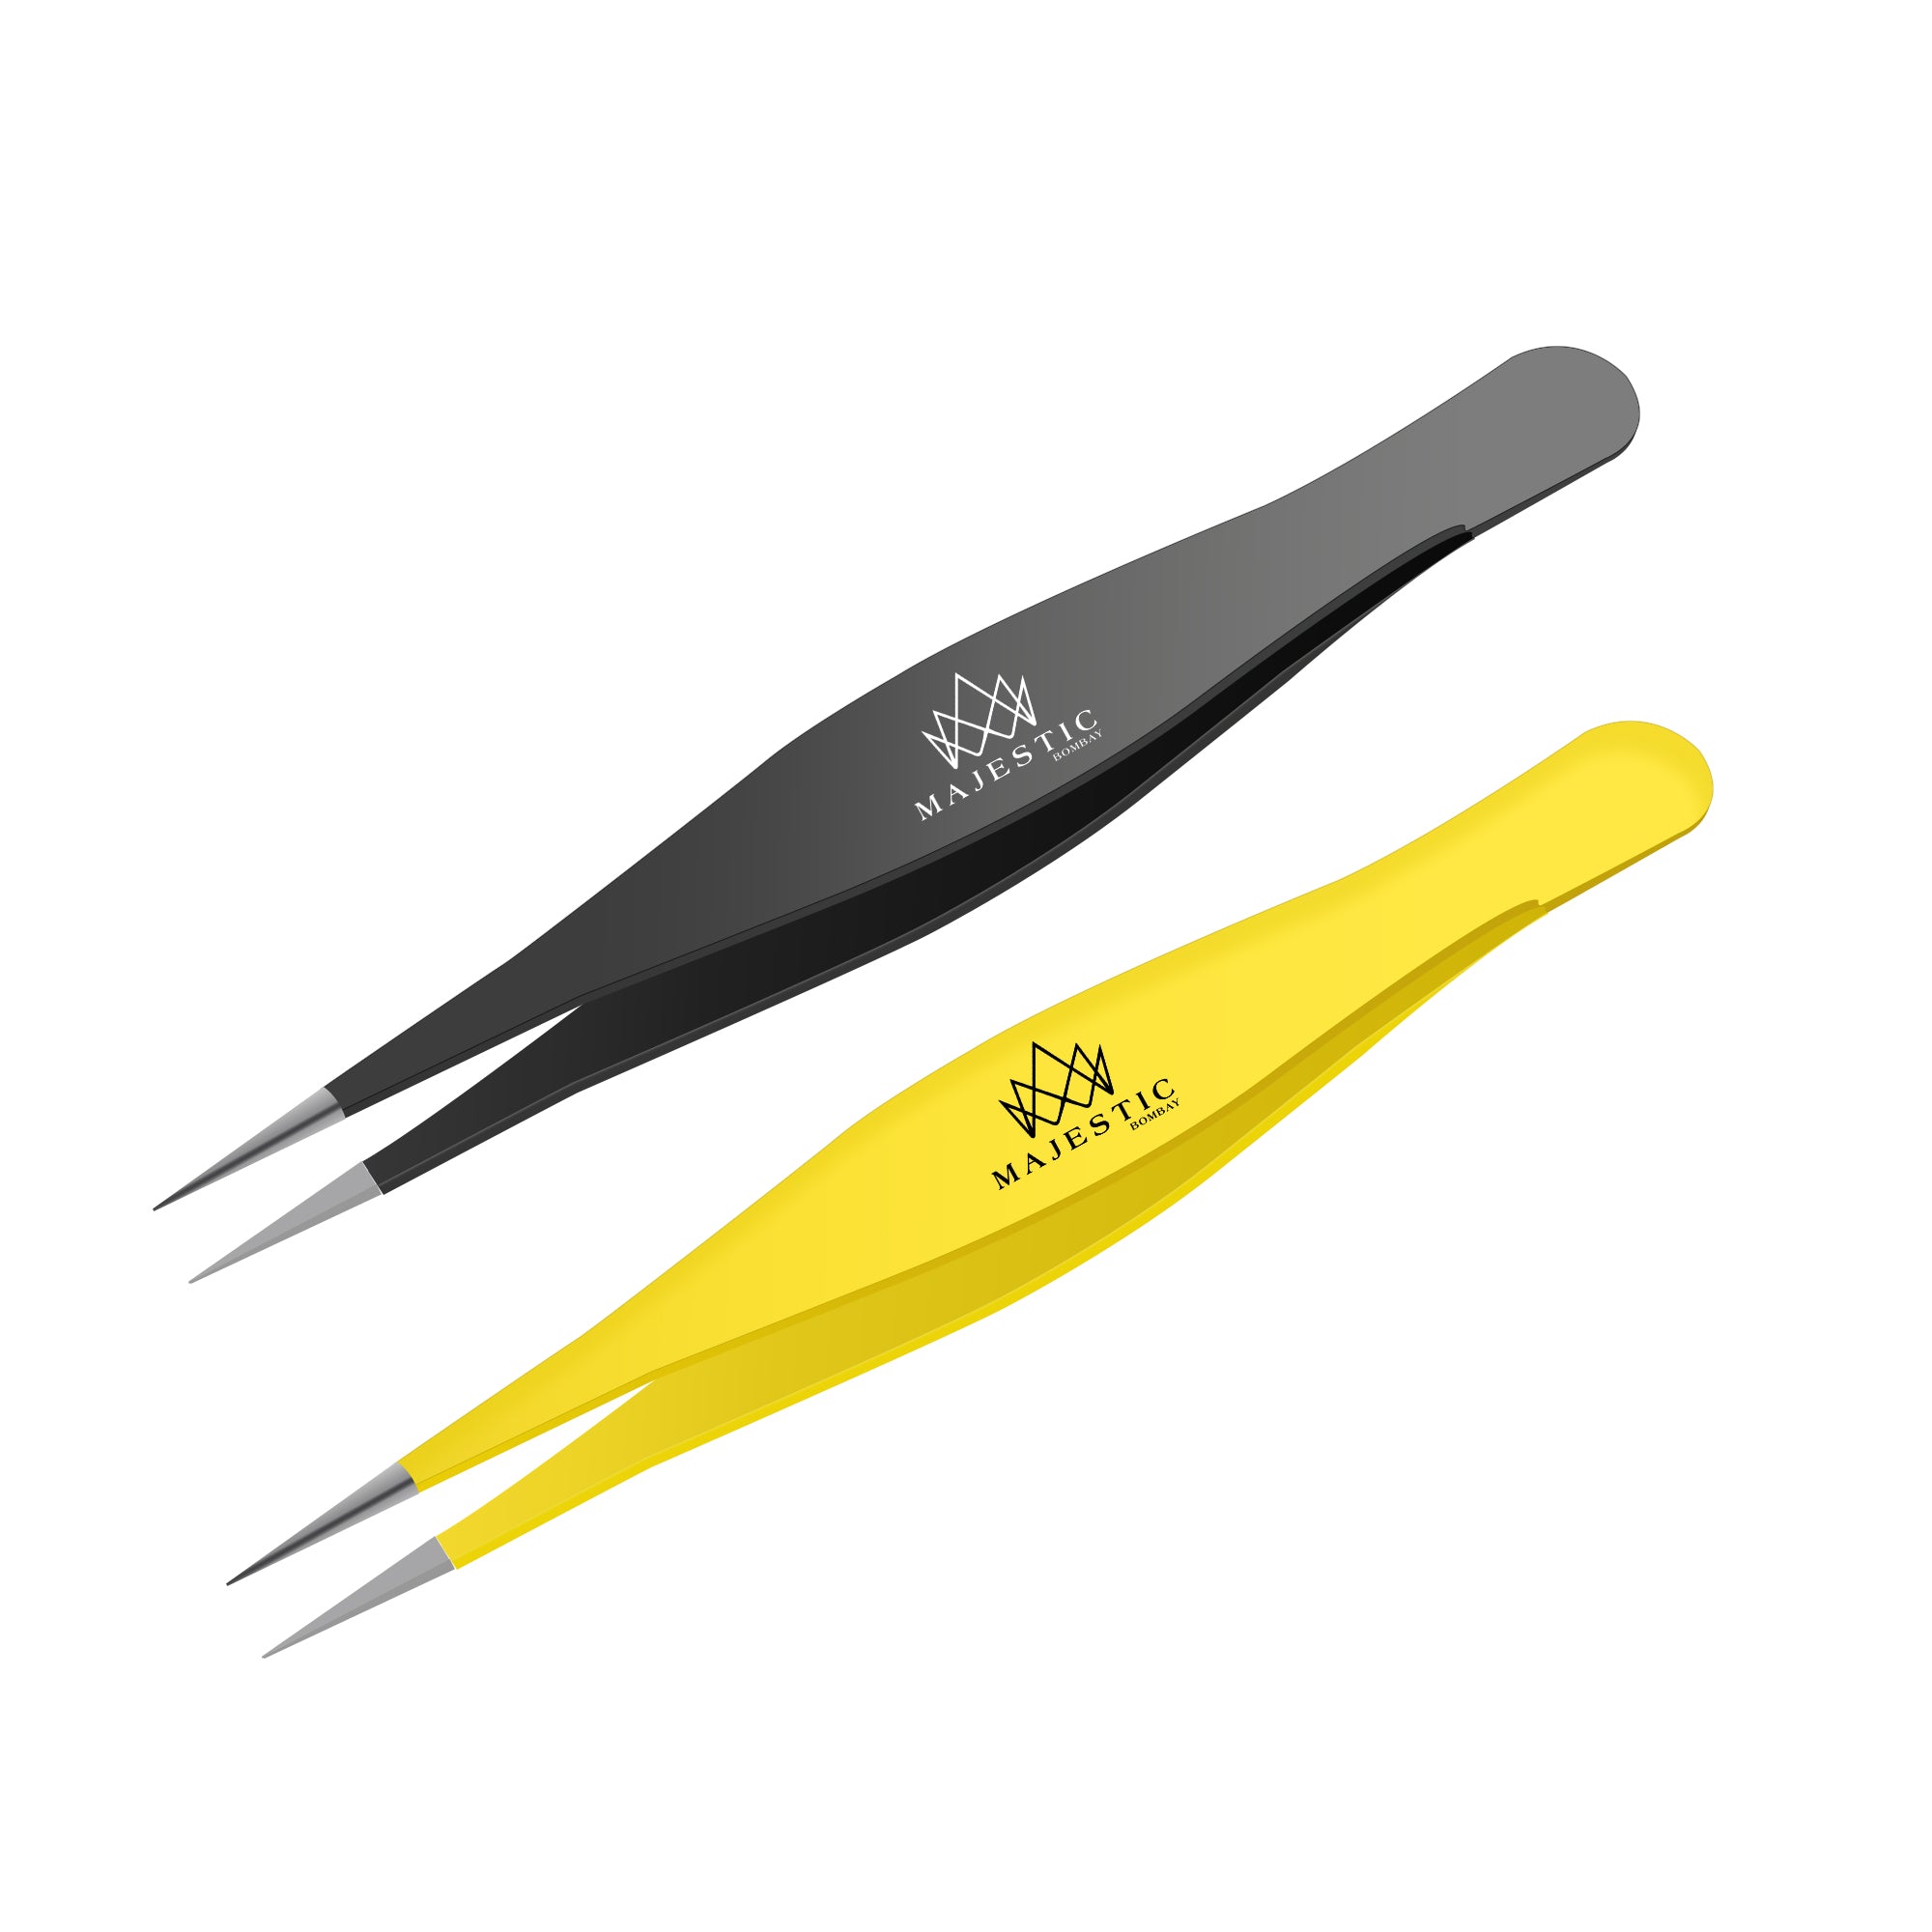 Surgical Tweezers for Ingrown Hair (Black and Yellow)